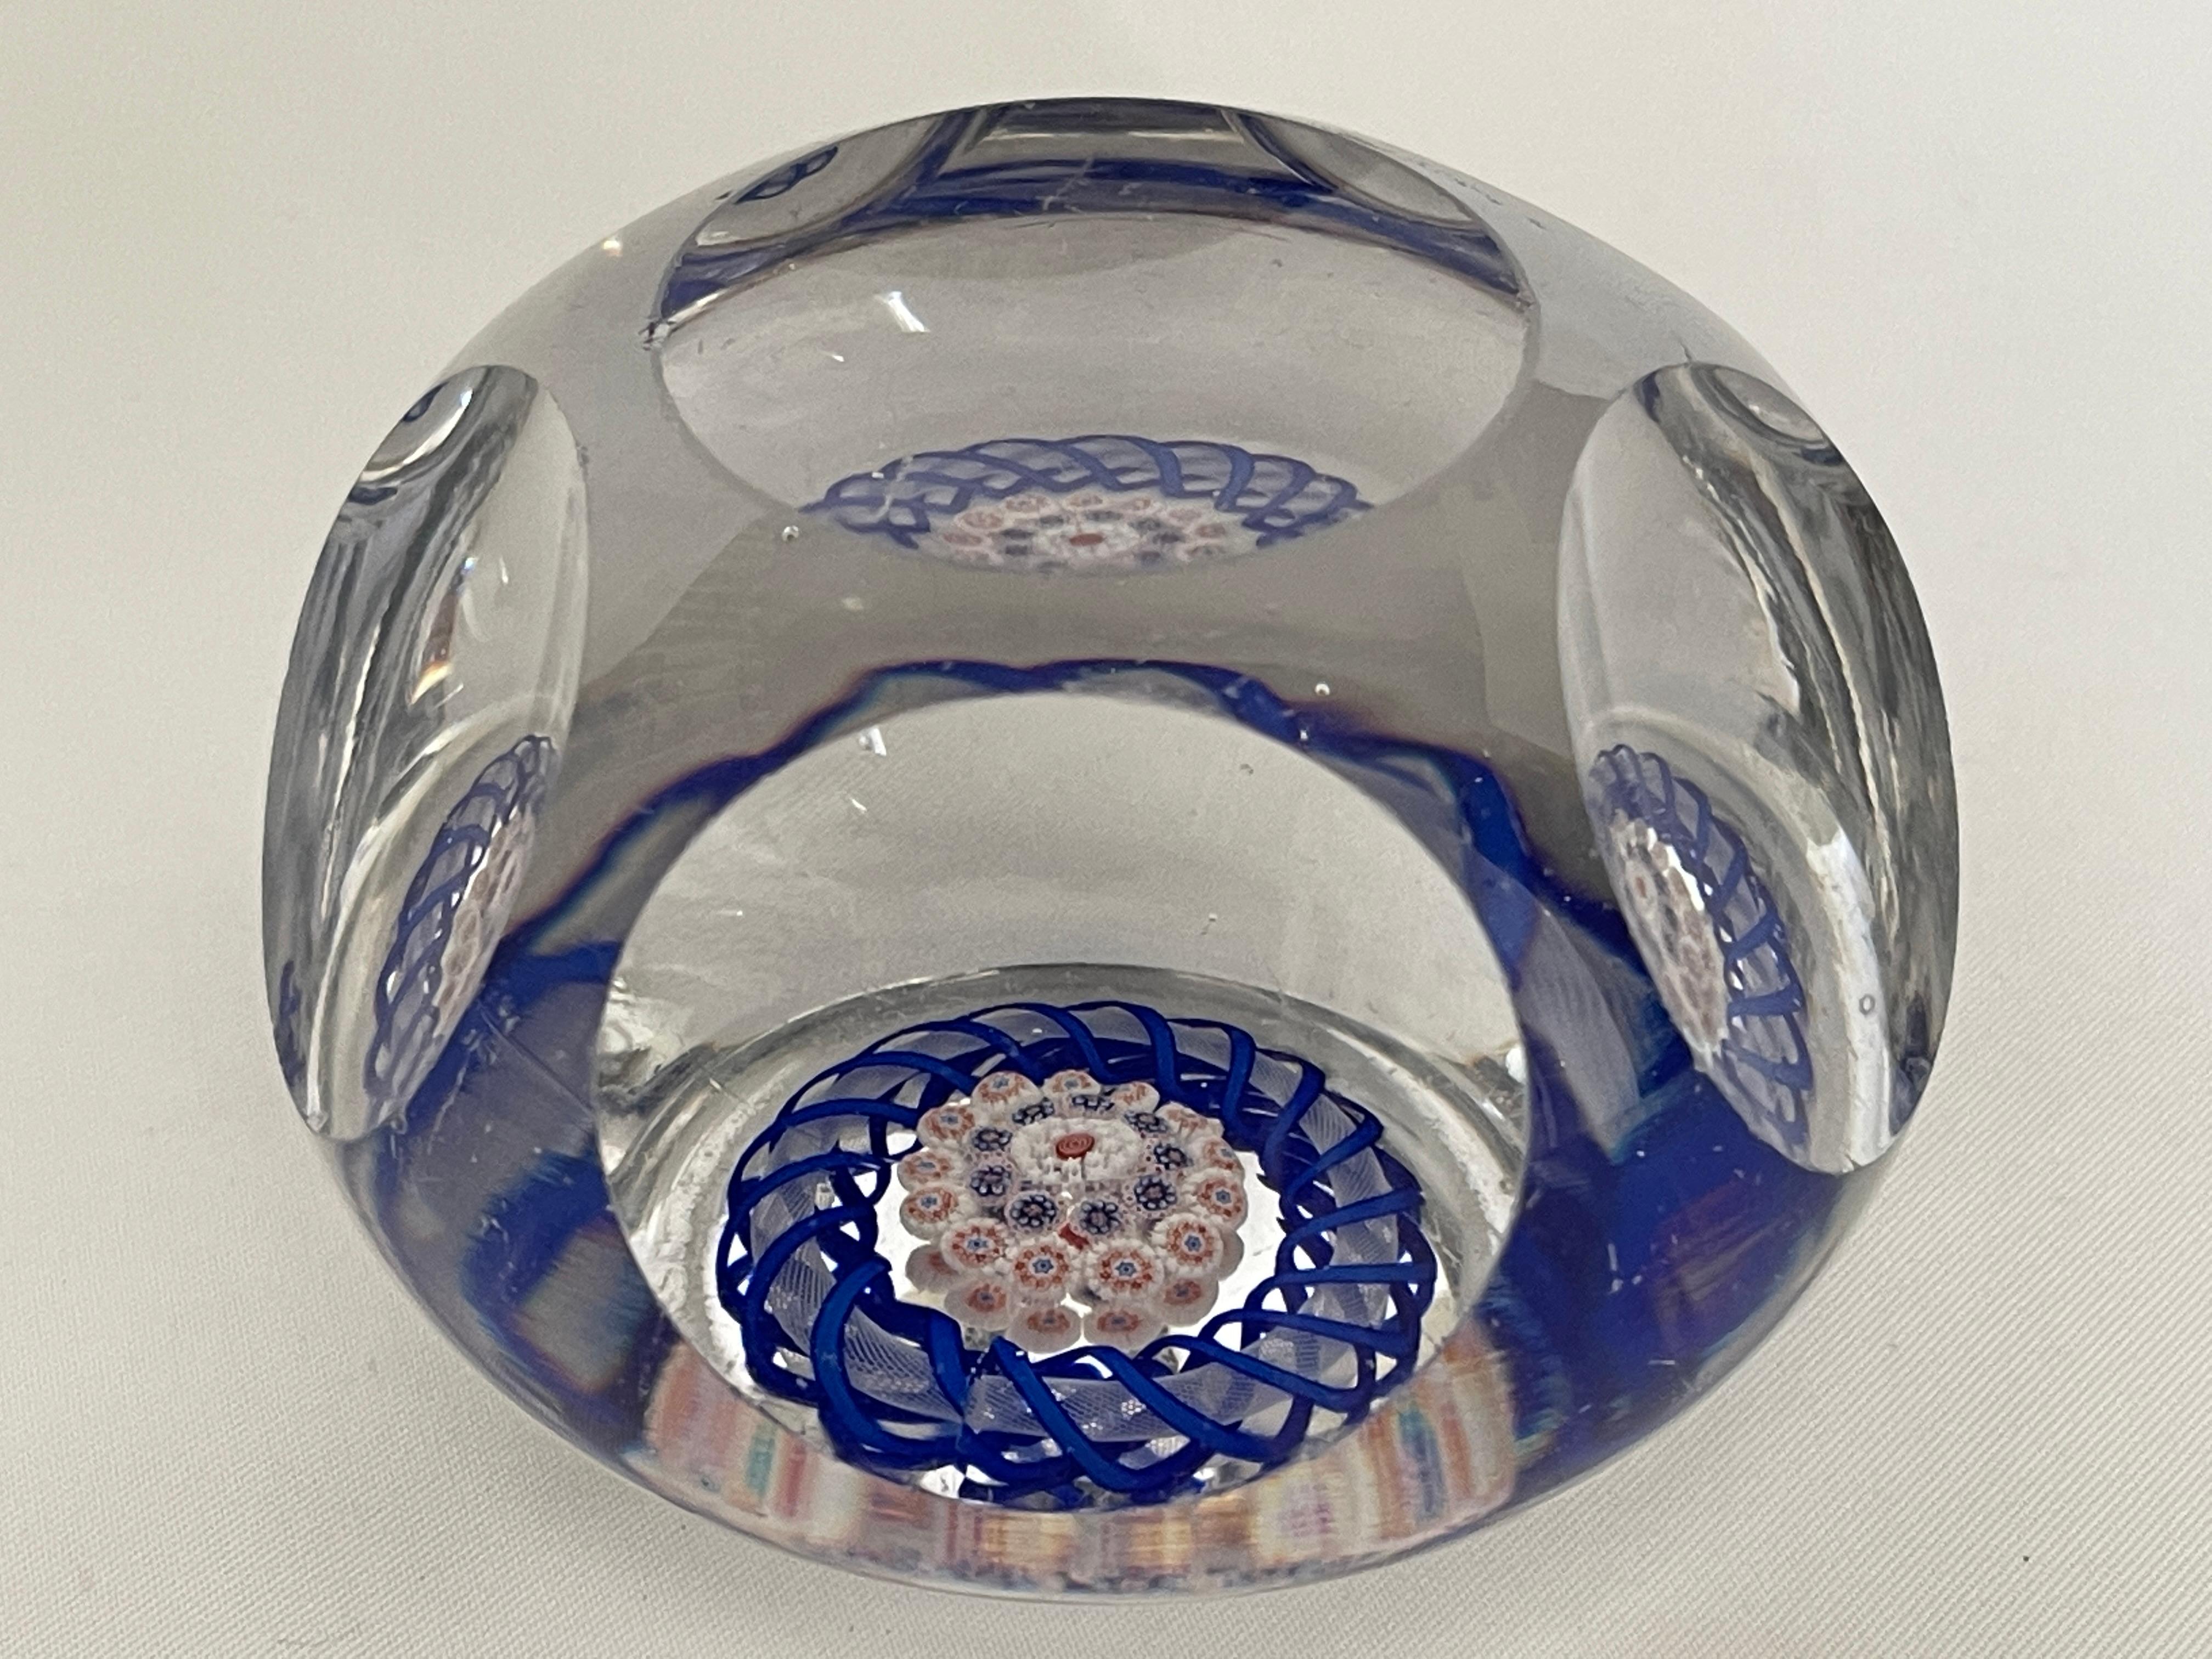 Antique Baccarat faceted art glass paperweight with closepack cane millefiori mushroom at center, surrounded with a blue torsade ribbon.
Paperweight has faceted convex circle at top and five faceted circles surrounding, which creates lovely windows